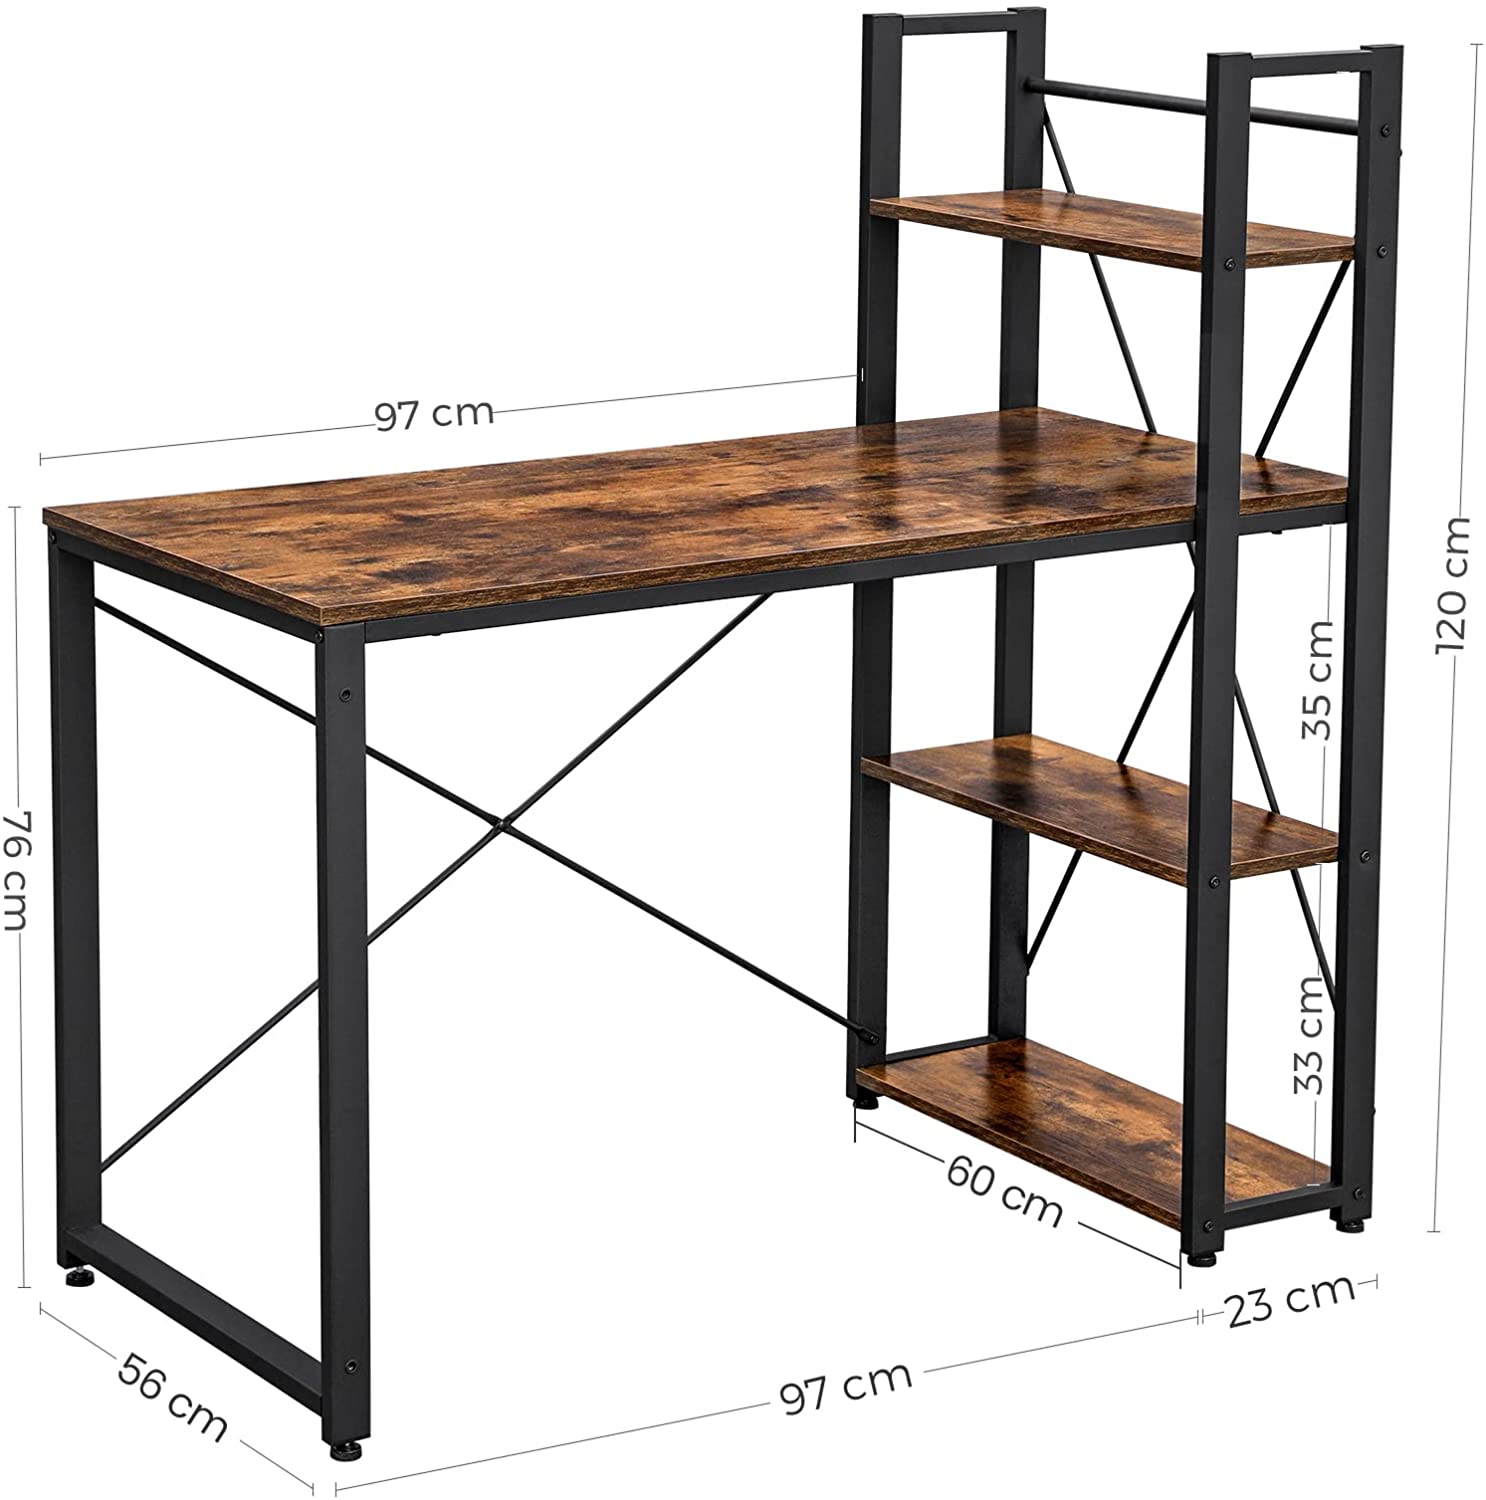 Computer Desk, 120 cm Writing Desk with Storage Shelves on Left or Right, Stable, Easy Assembly, for Home Office, Industrial Style, Rustic Brown and Black LWD48X RAW58.dk 